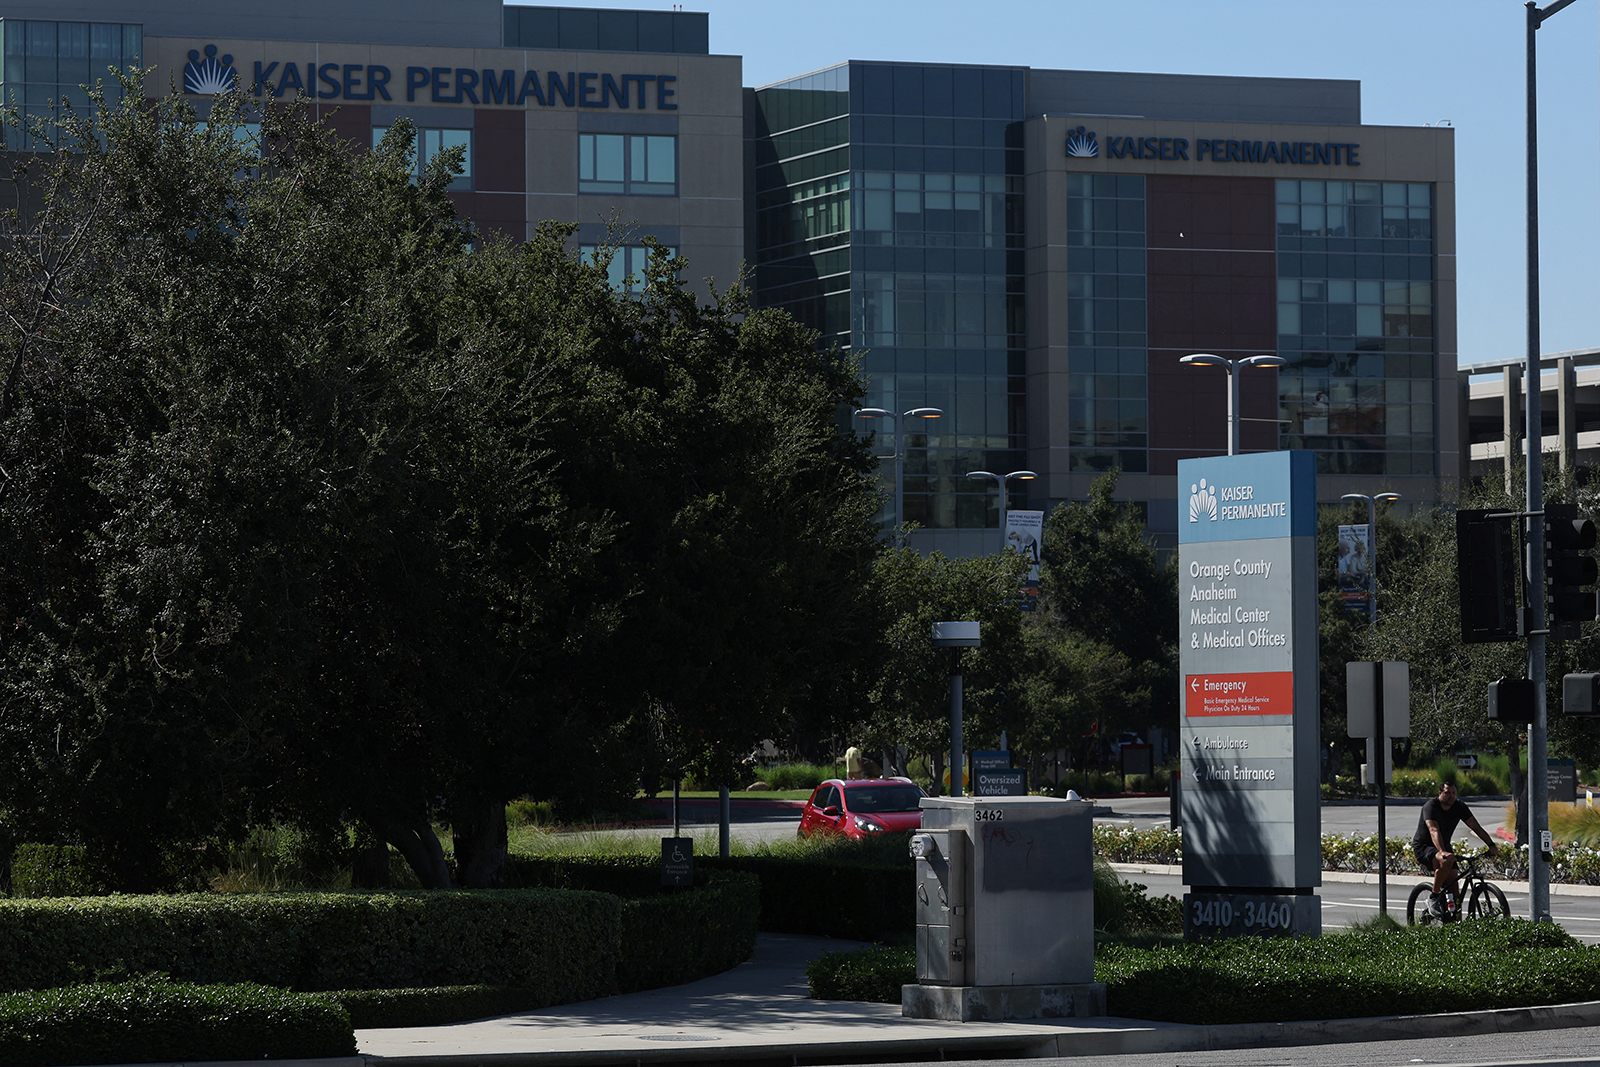 A Kaiser Permanente health care center is pictured in Anaheim, California, on October 3 as more than 75,000 Kaiser Permanente healthcare workers could go on strike from Oct. 4 to Oct. 7 across the United States. 